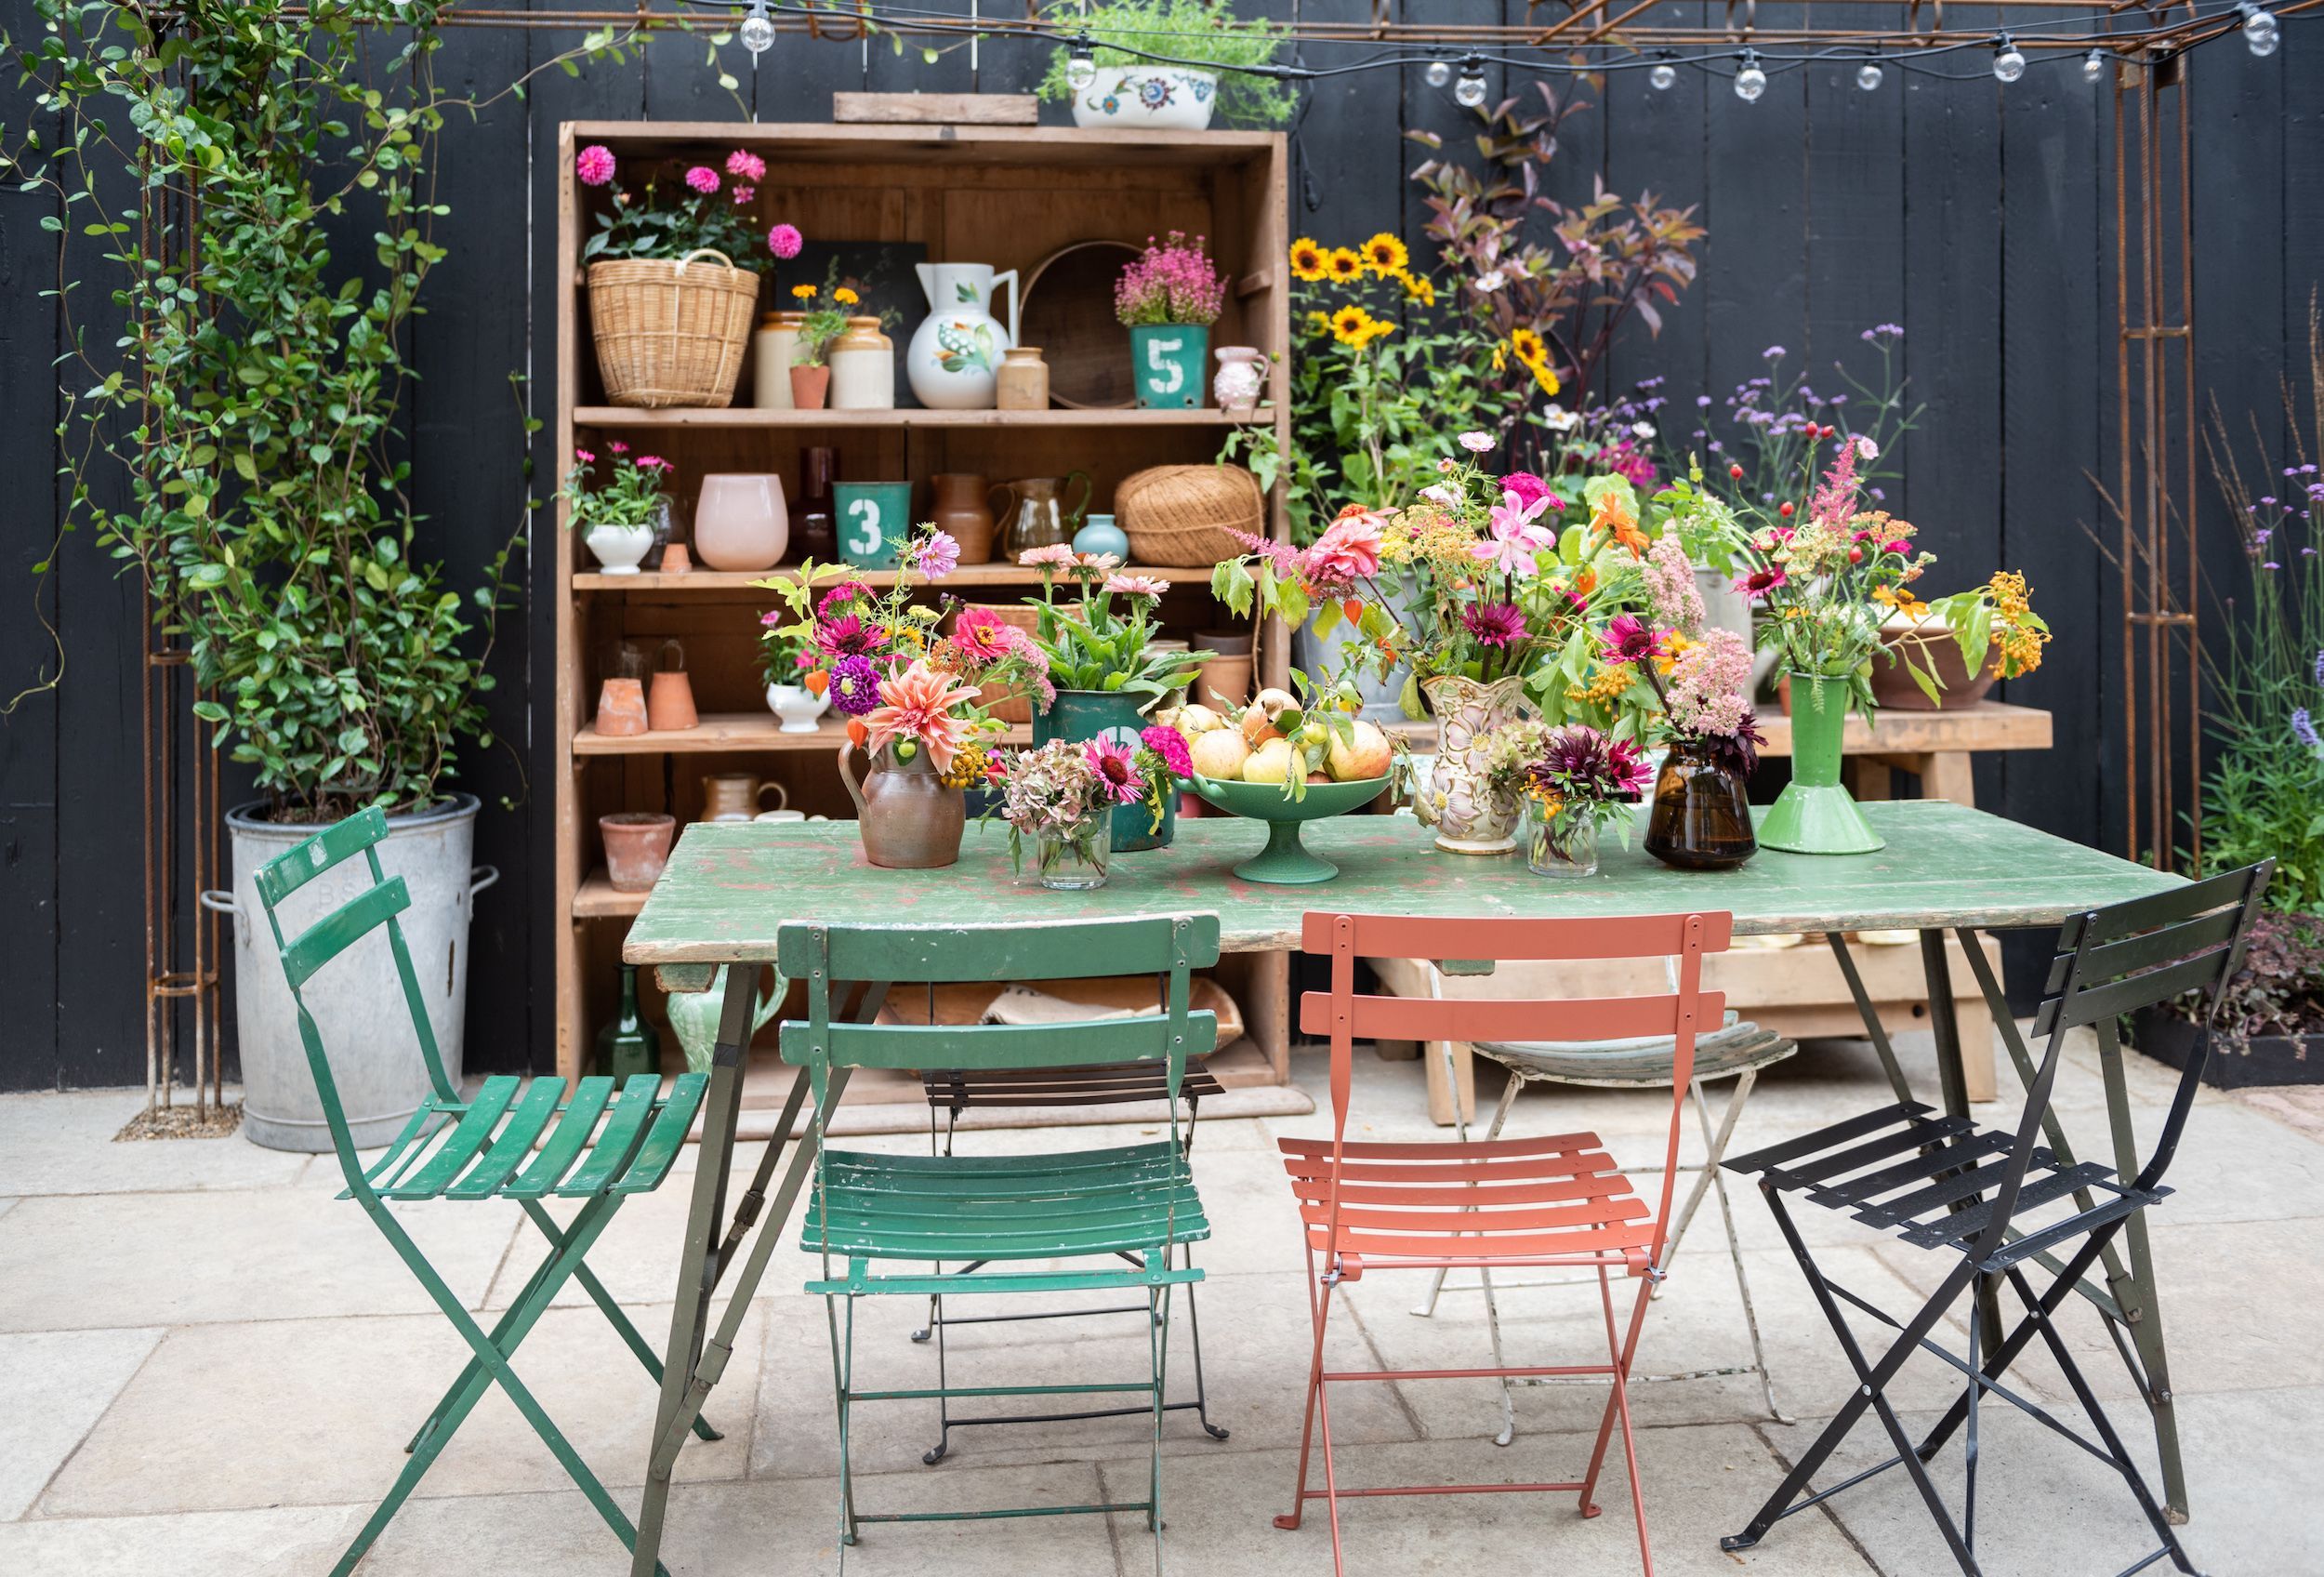 5 Easy Styling Tips To Transform Your Autumn Garden